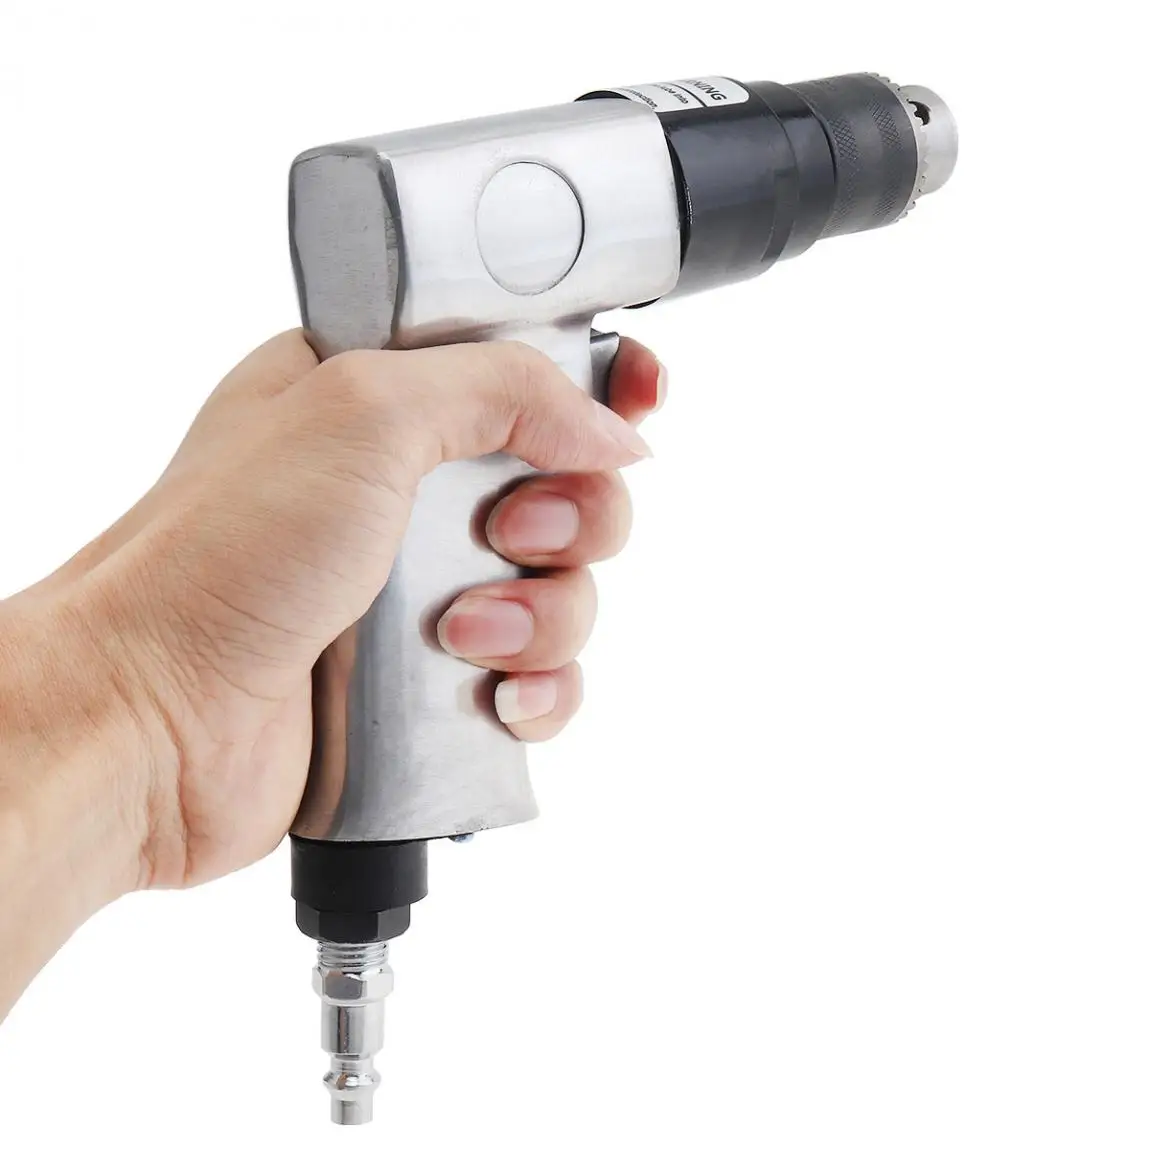 

High-speed Positive Reversal Pistol-type Pneumatic Gun Drill with Chuck Wrench 1/4" 1700rpm Pneumatic drill for Hole Drilling